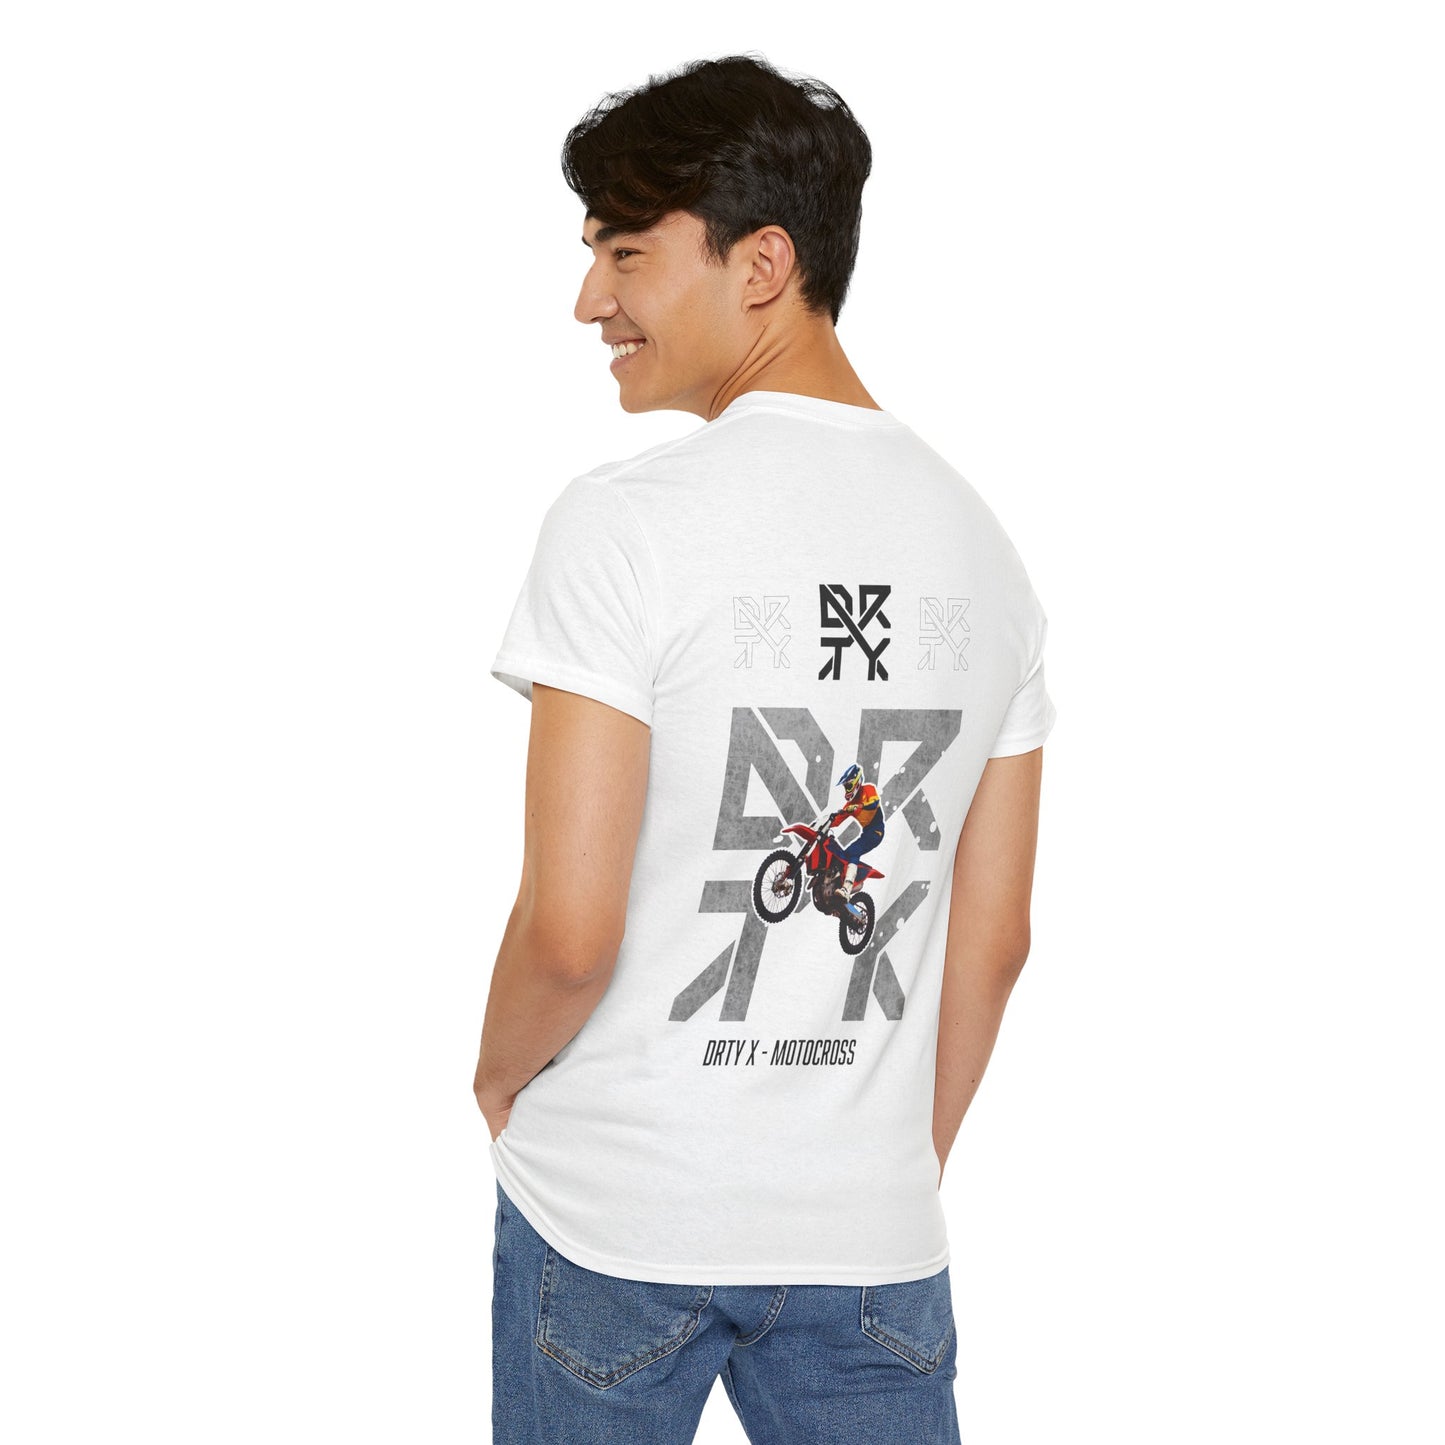 This image showcases a man wearing the back view of a T-shirt with a motocross bike jumping over top of a DRTY X logo on the middle top and center back, with text below that says DRTY X motocross.